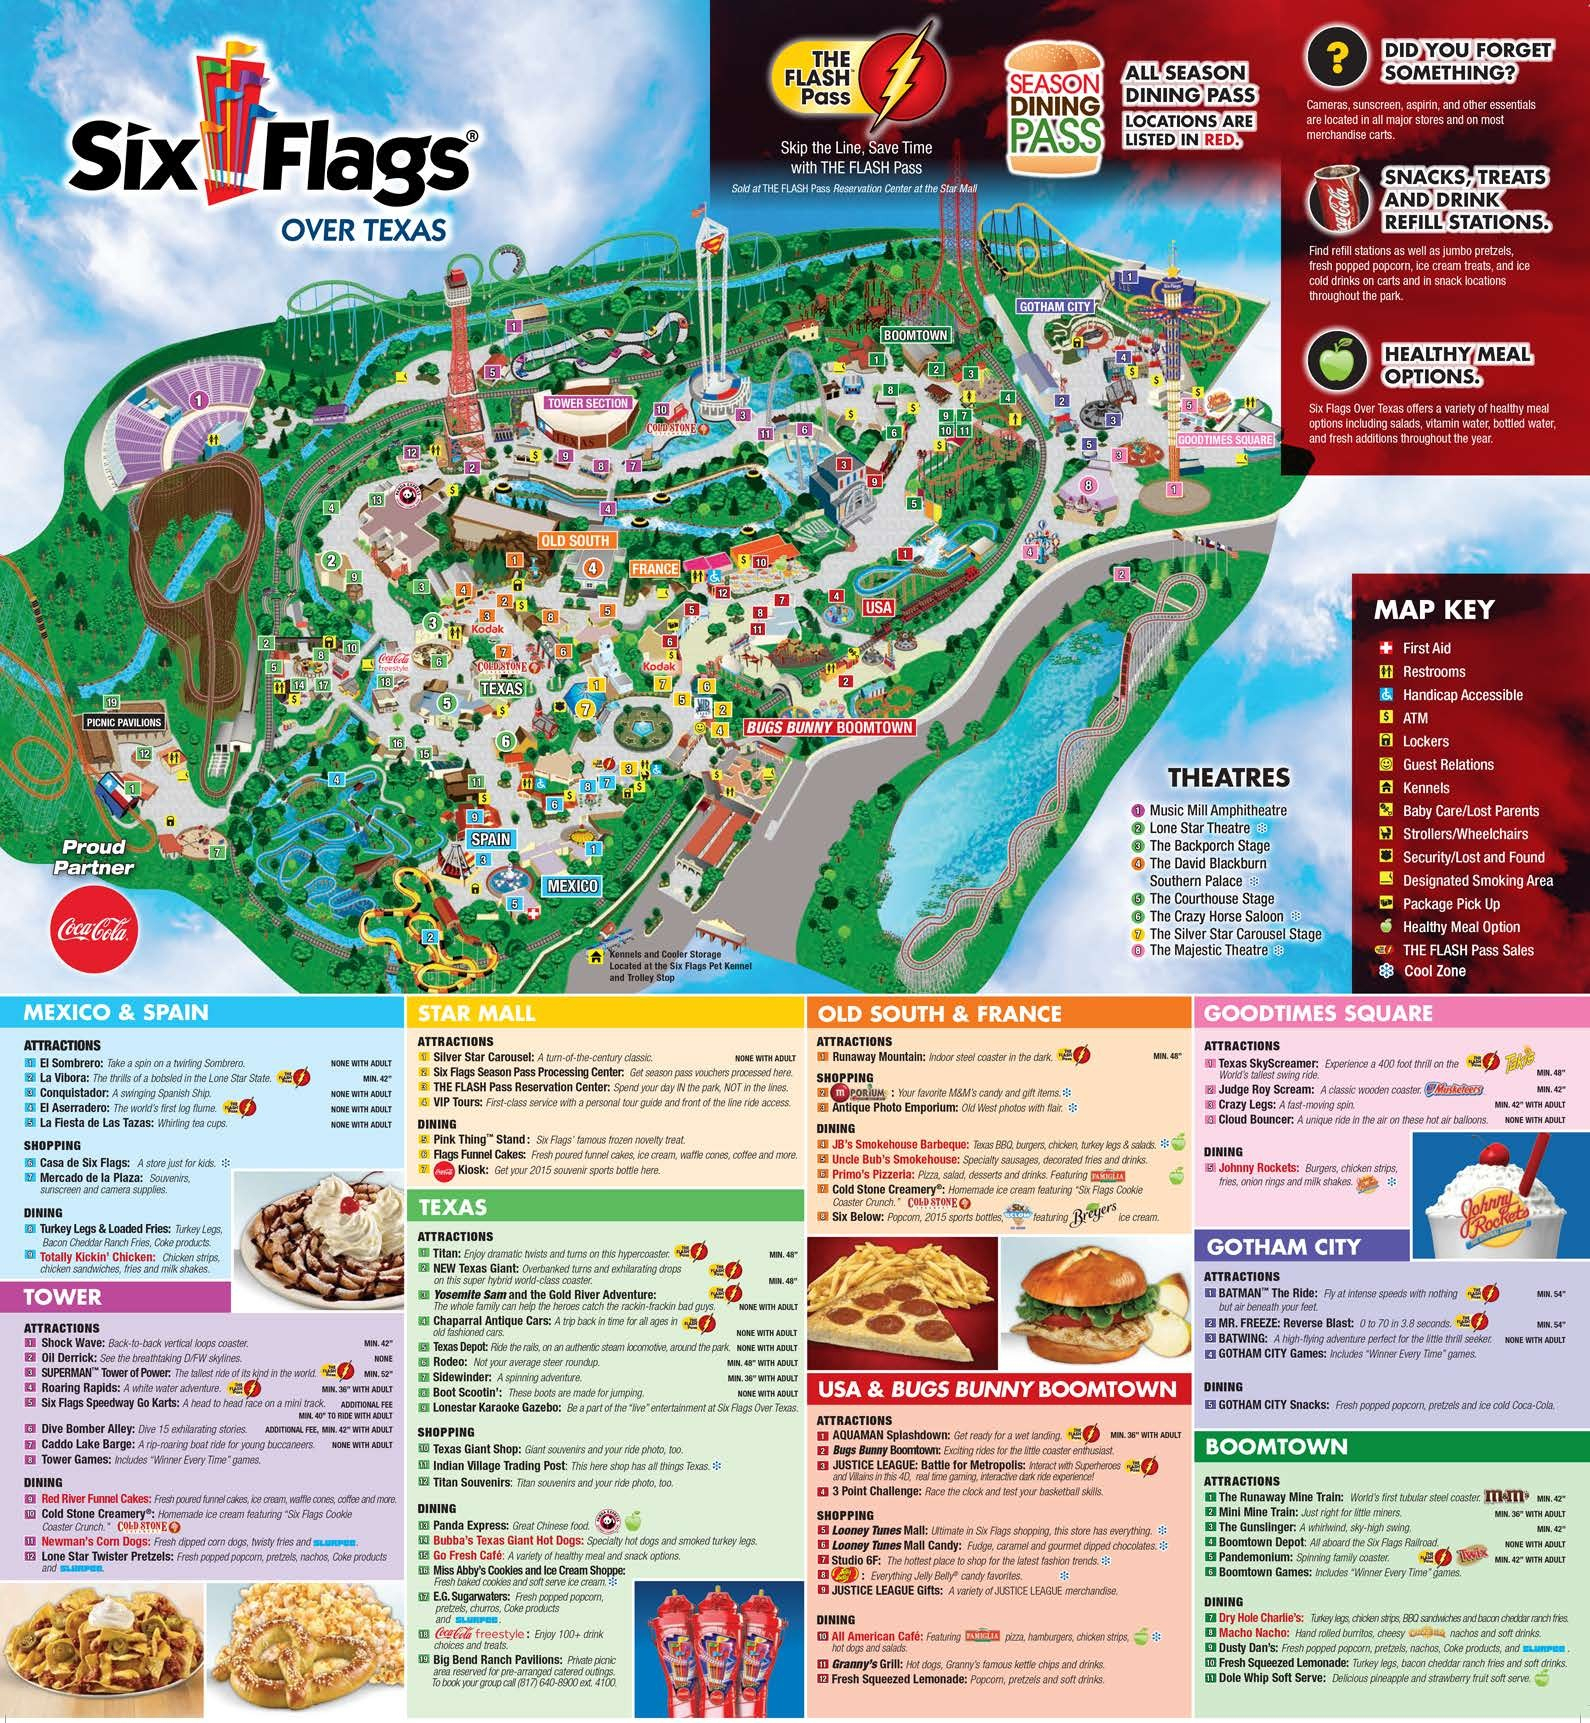 16 Six Flags Over Texas Map | Settoplinux - Six Flags Over Texas Map